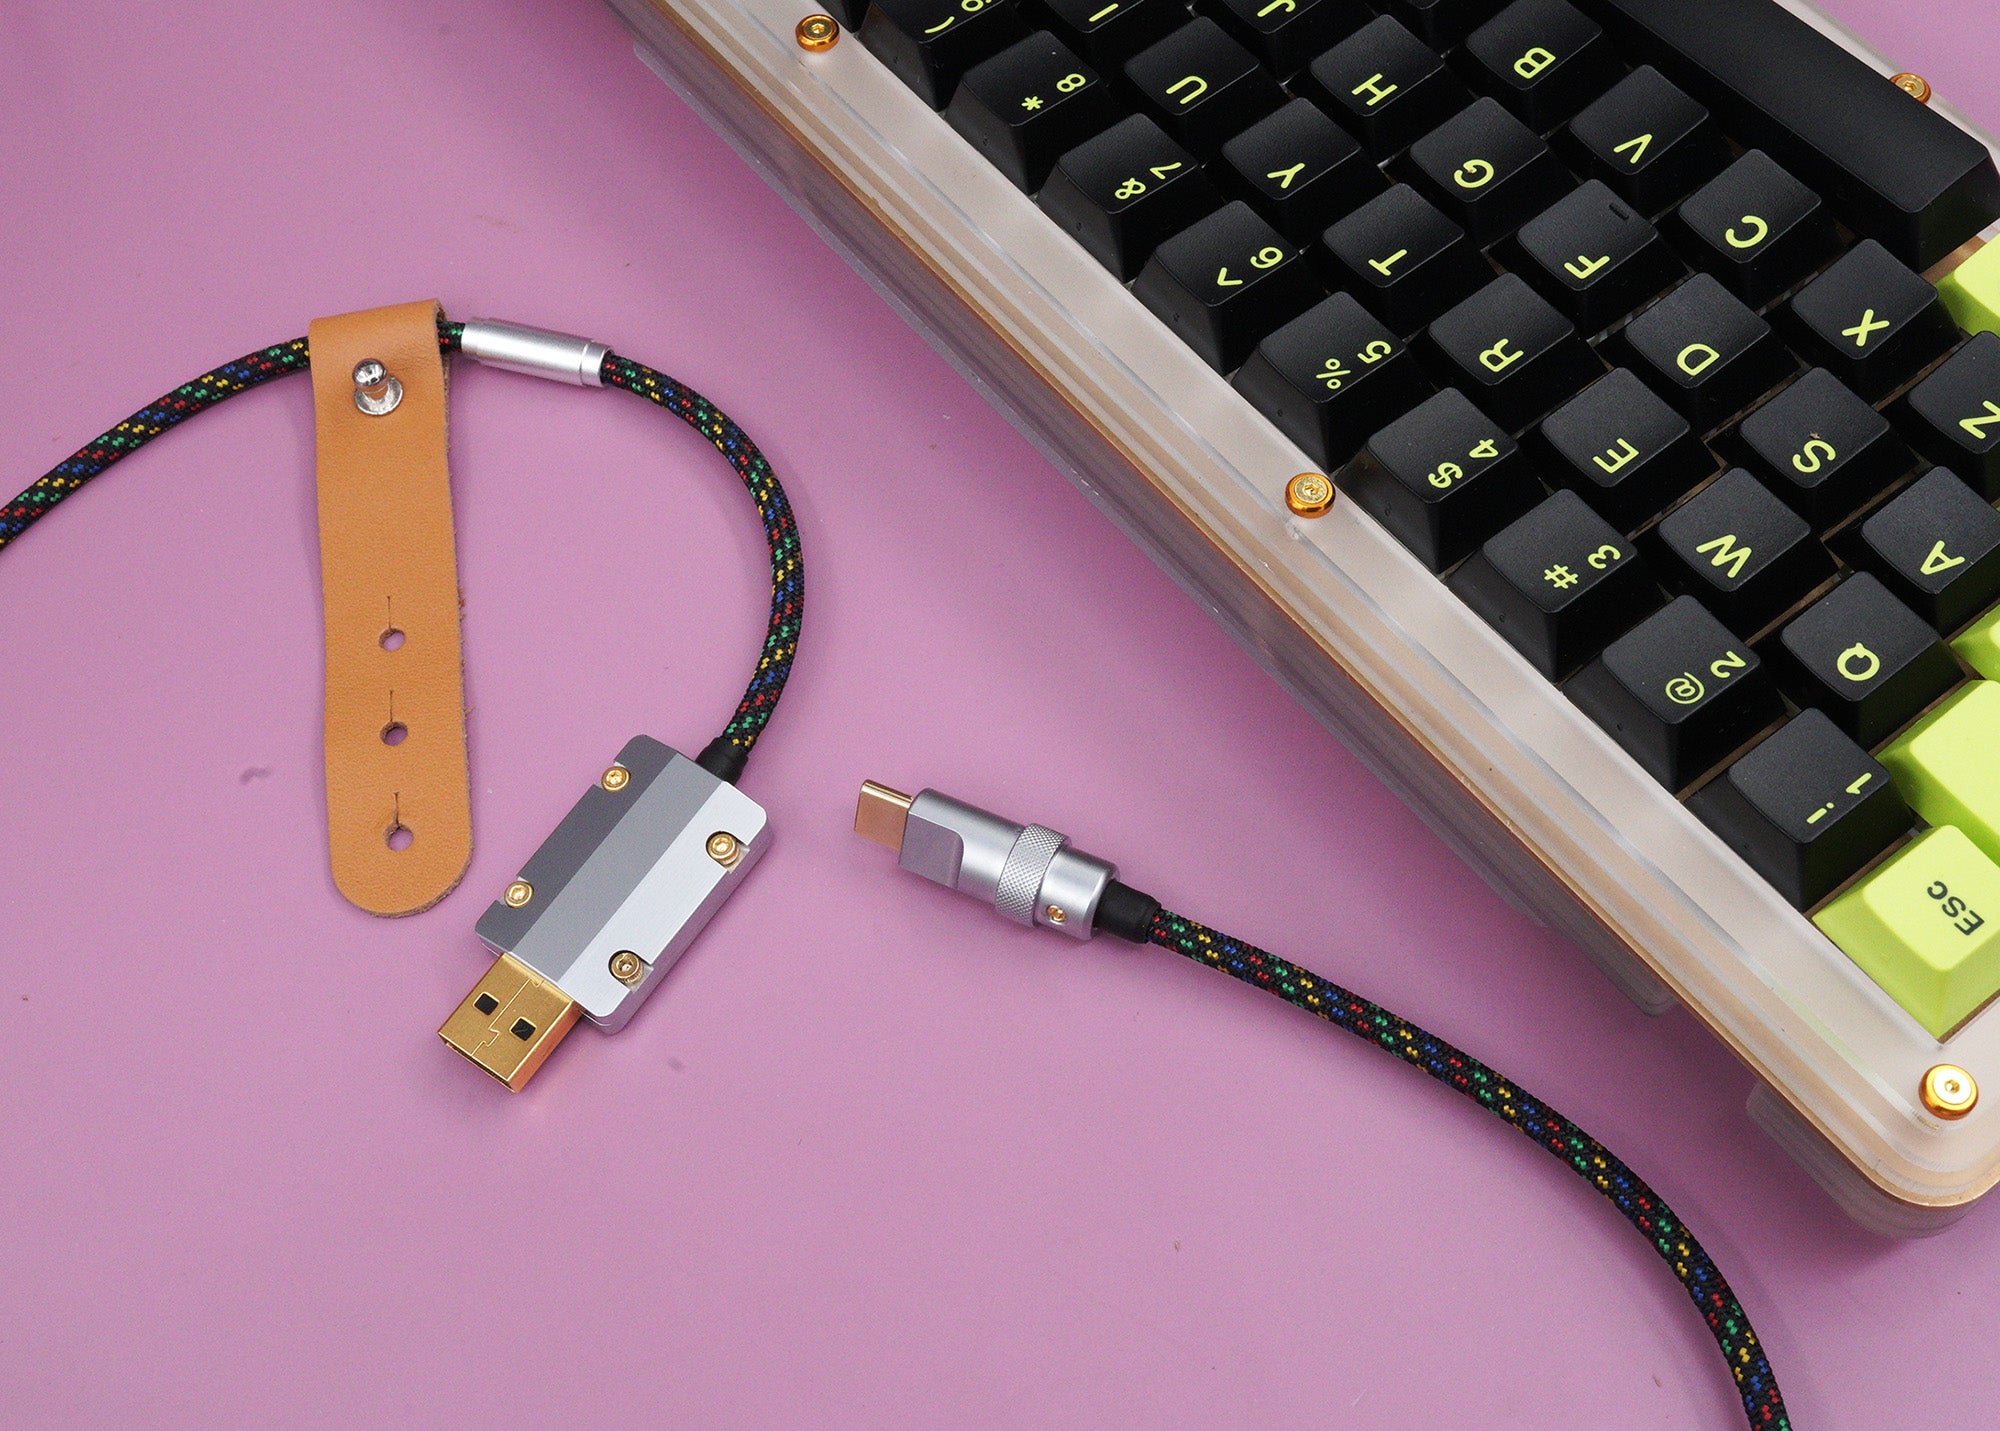 GeekCable Manual Customized USB Keyboard Cable